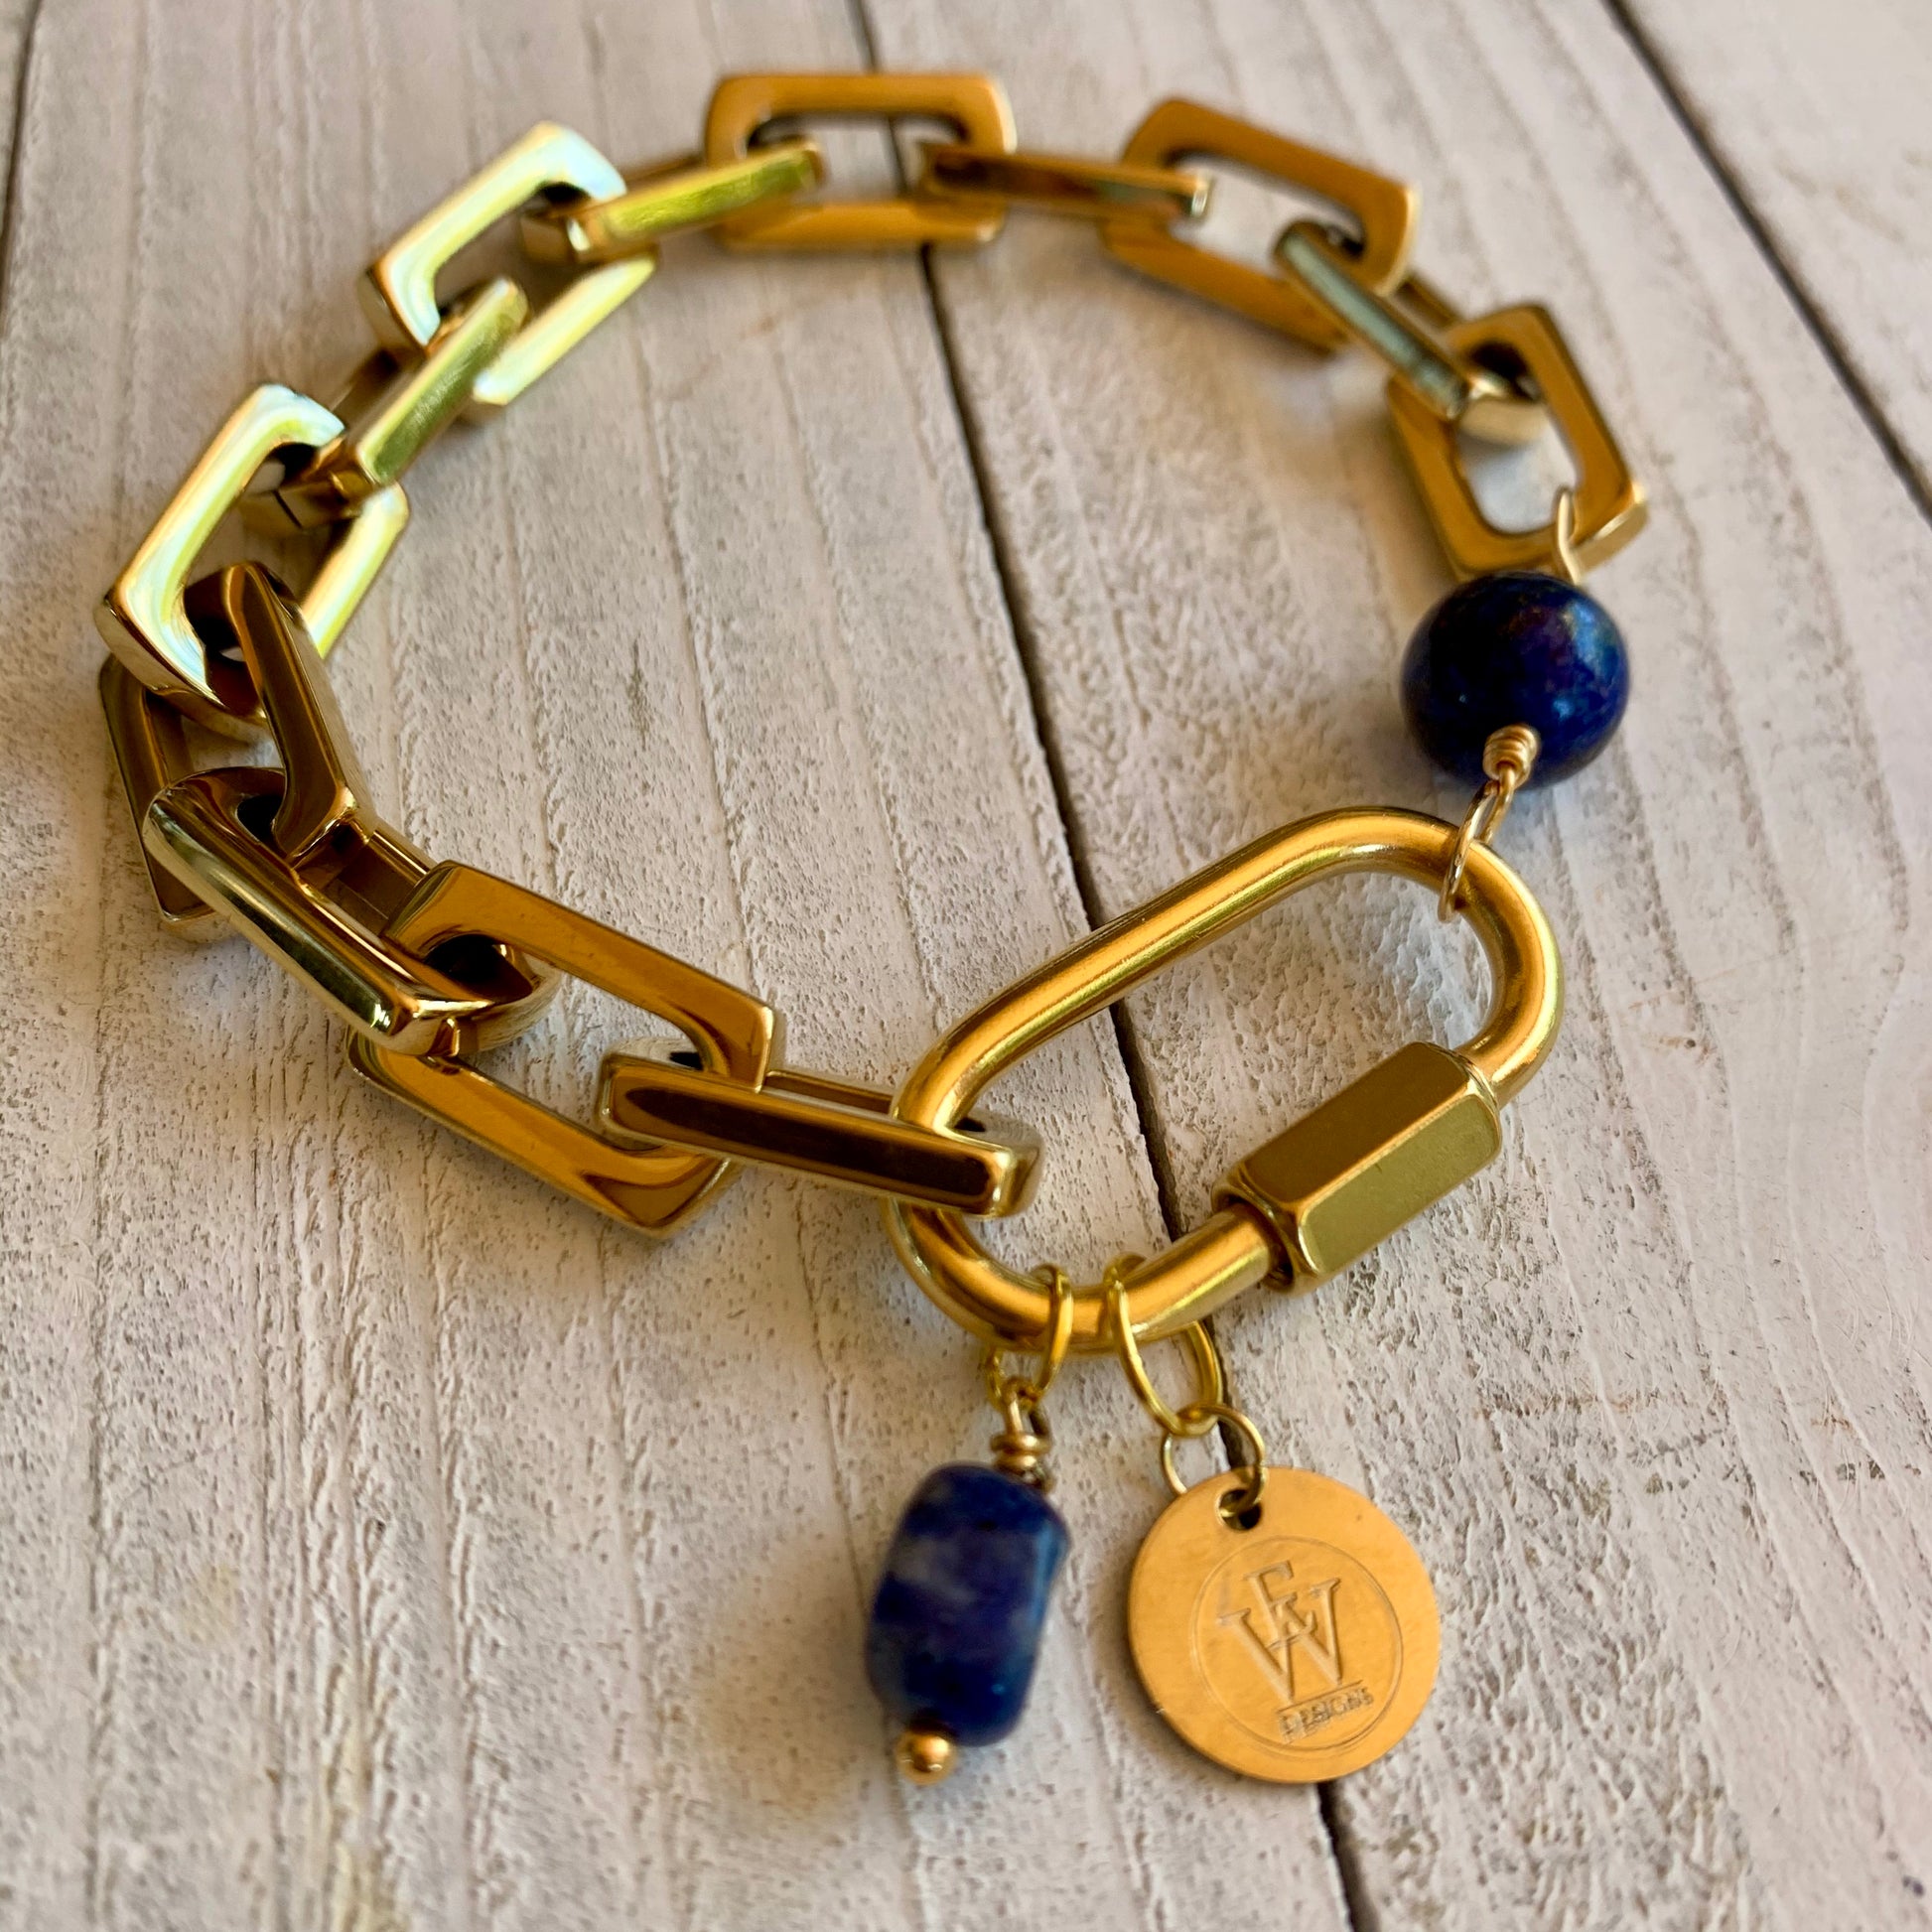 18k Gold Plated Chain Link Bracelet featuring Lapis Lazuli beads